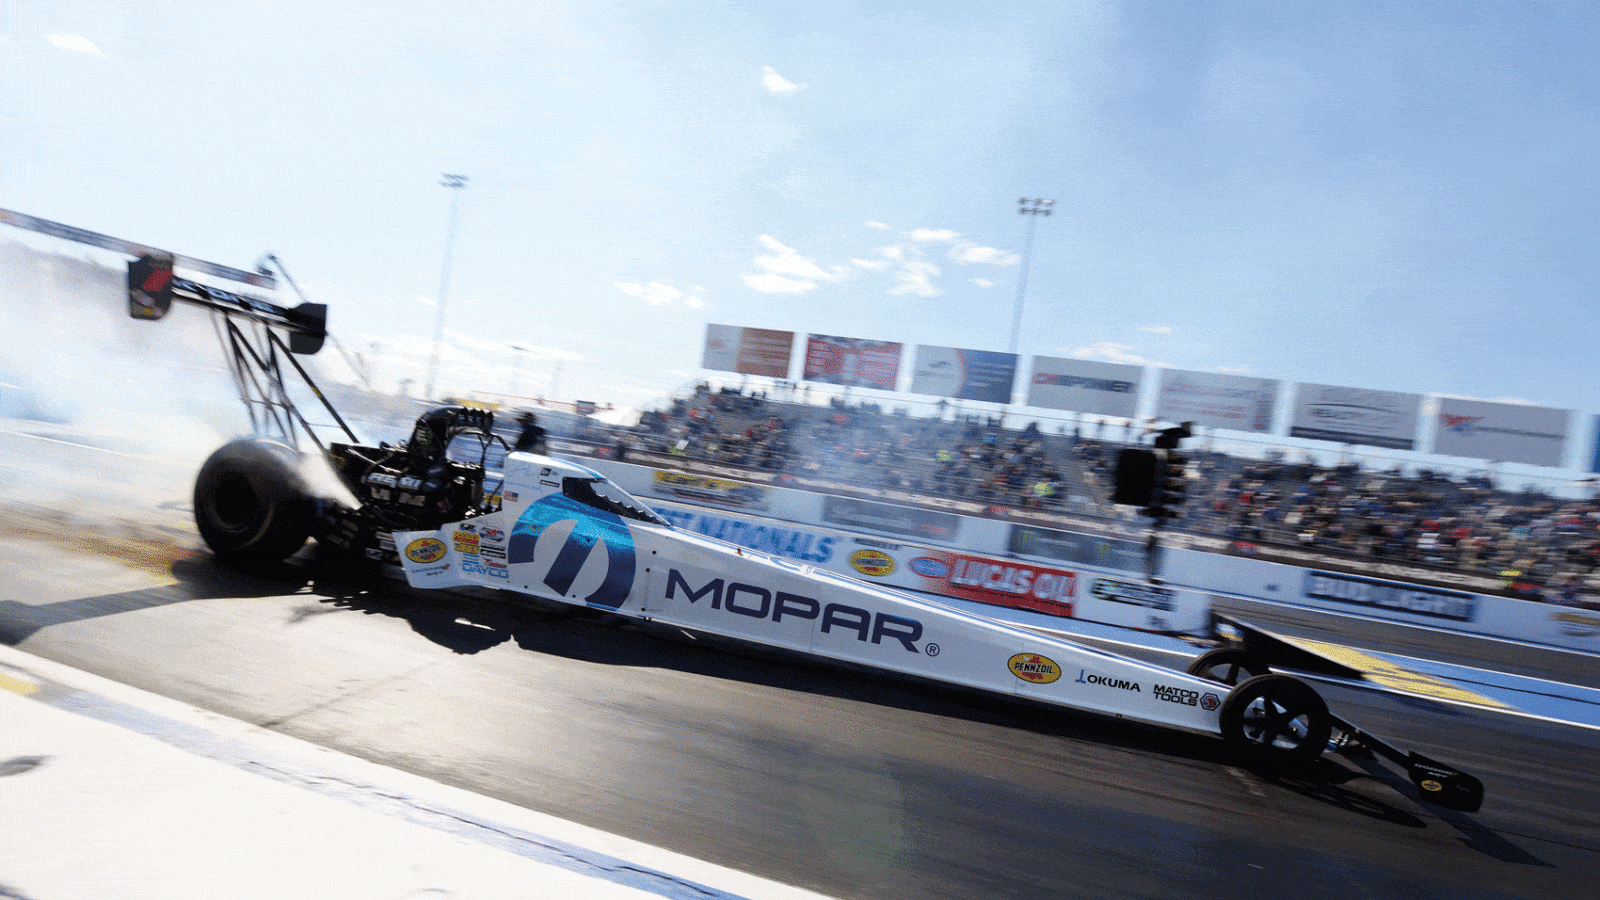 Drag racing is well-represented with women drivers, including Leah Pruett